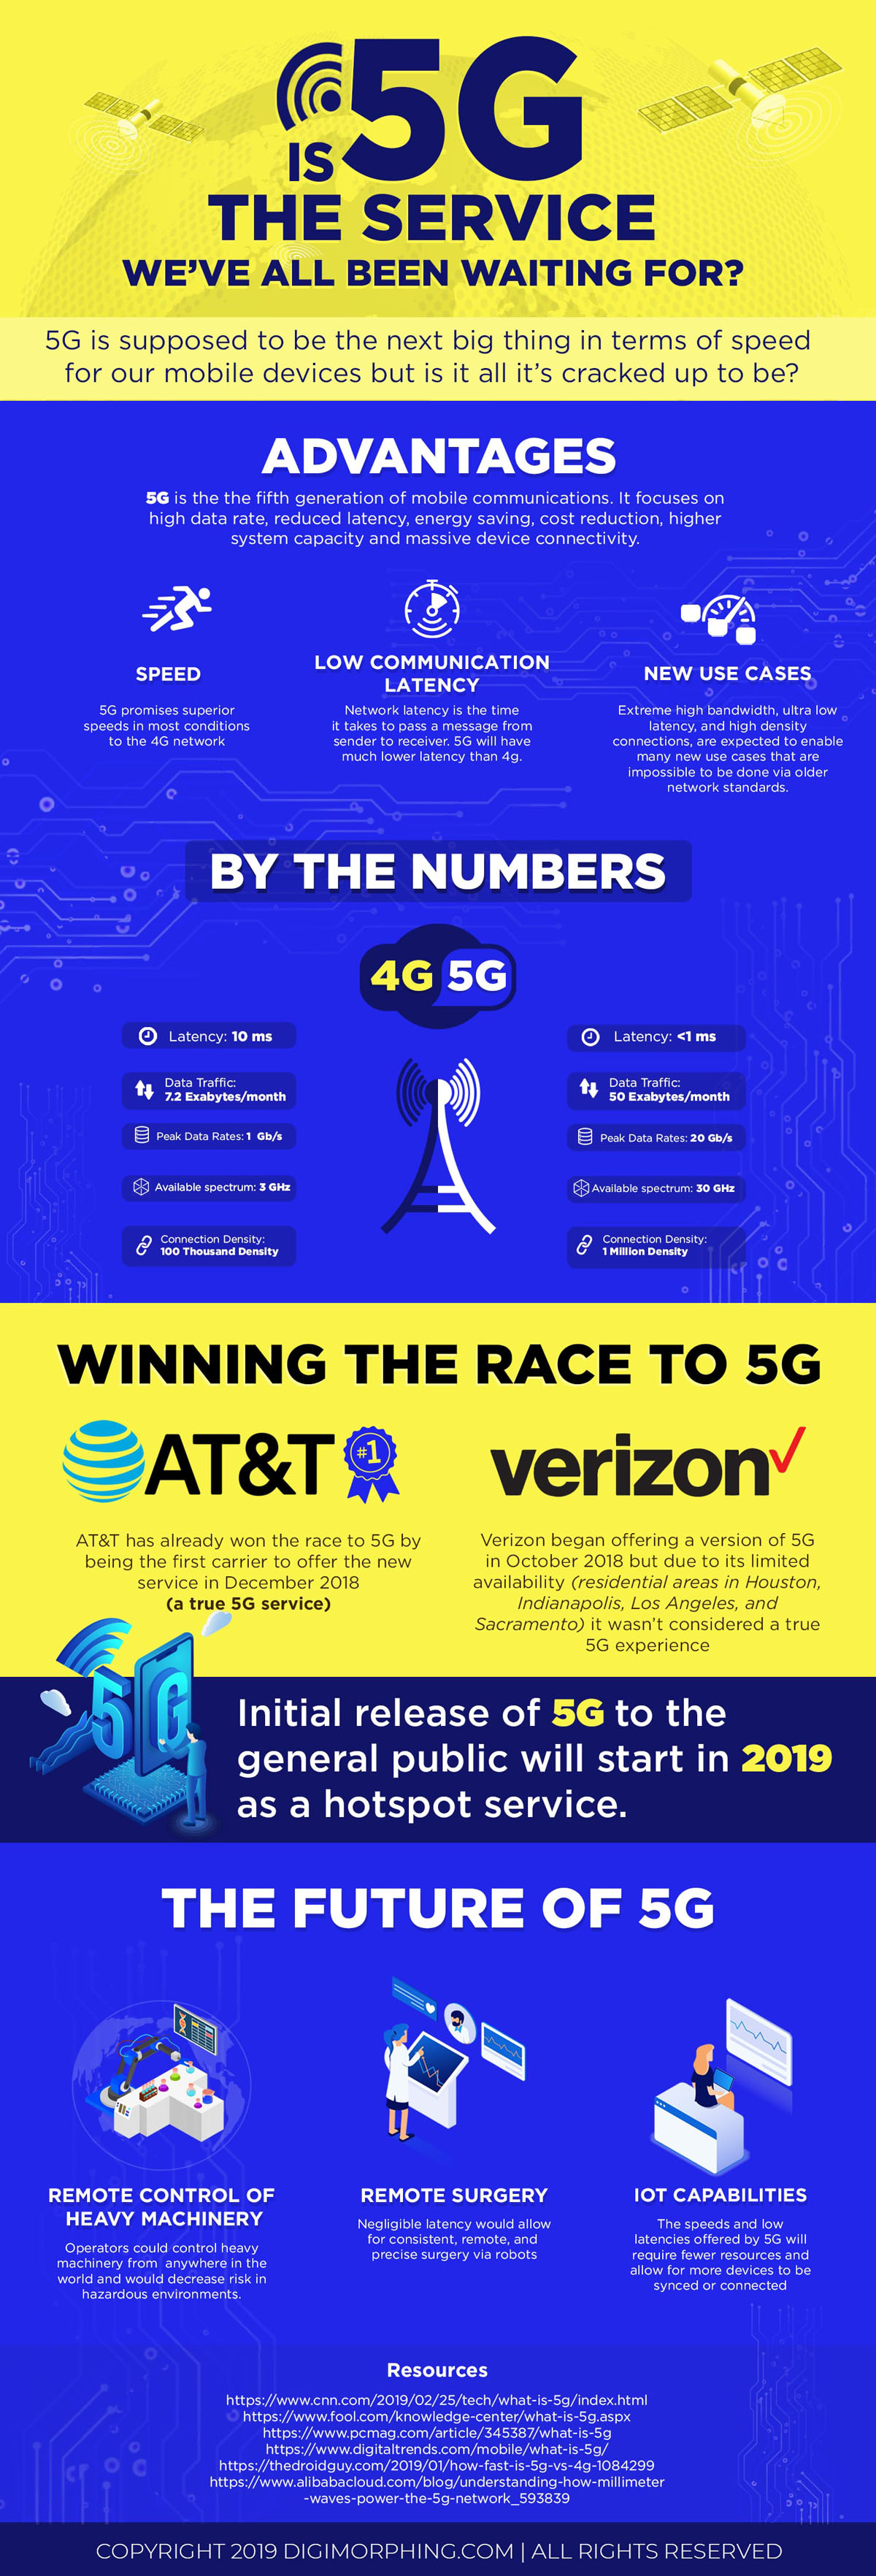 The Future of 5G Internet